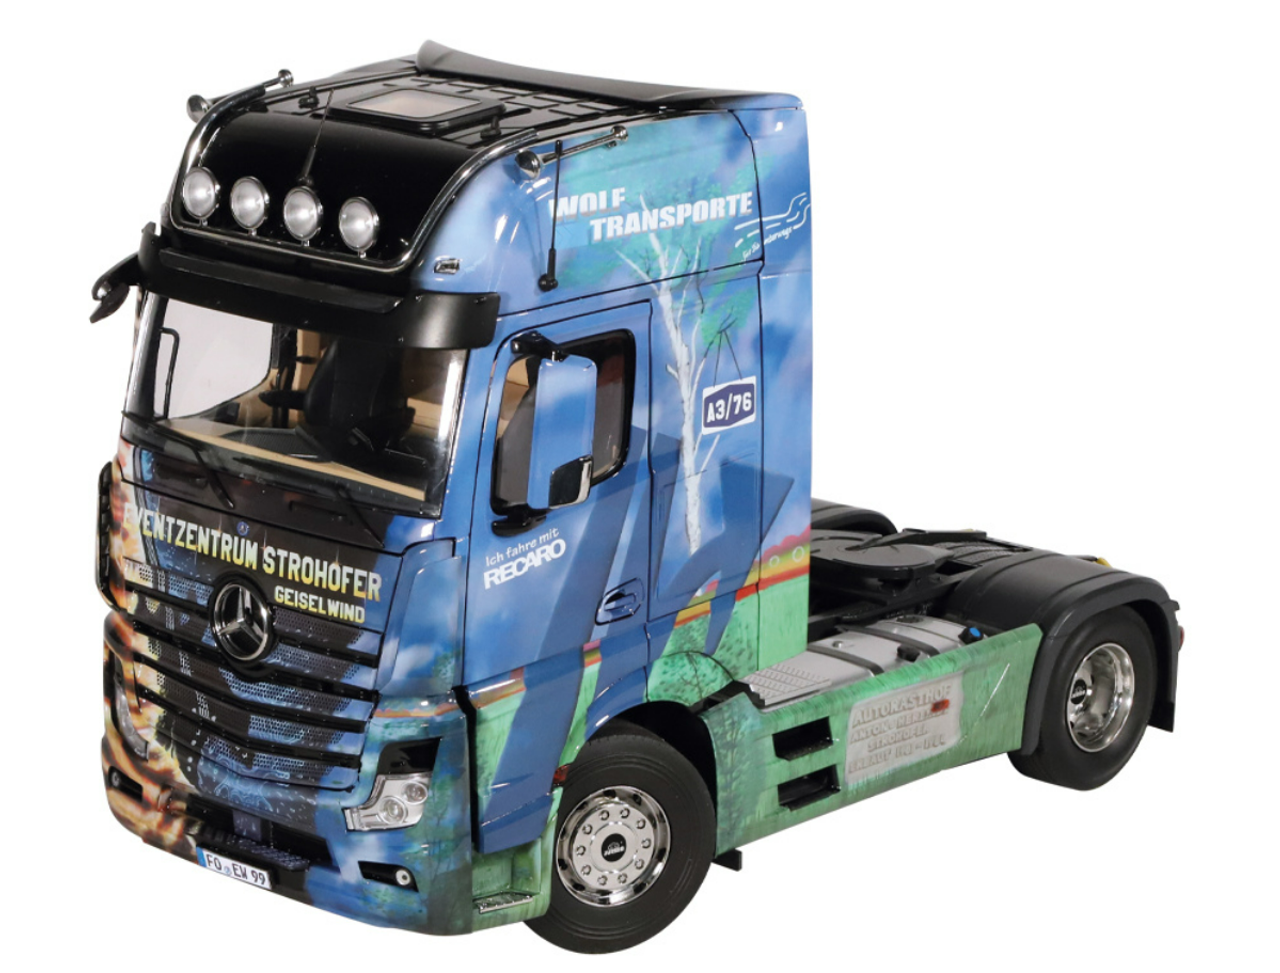 1/18 NZG Mercedes-Benz Actros GigaSpace 4x2 "Strohofer" with Lighting Diecast Car Model